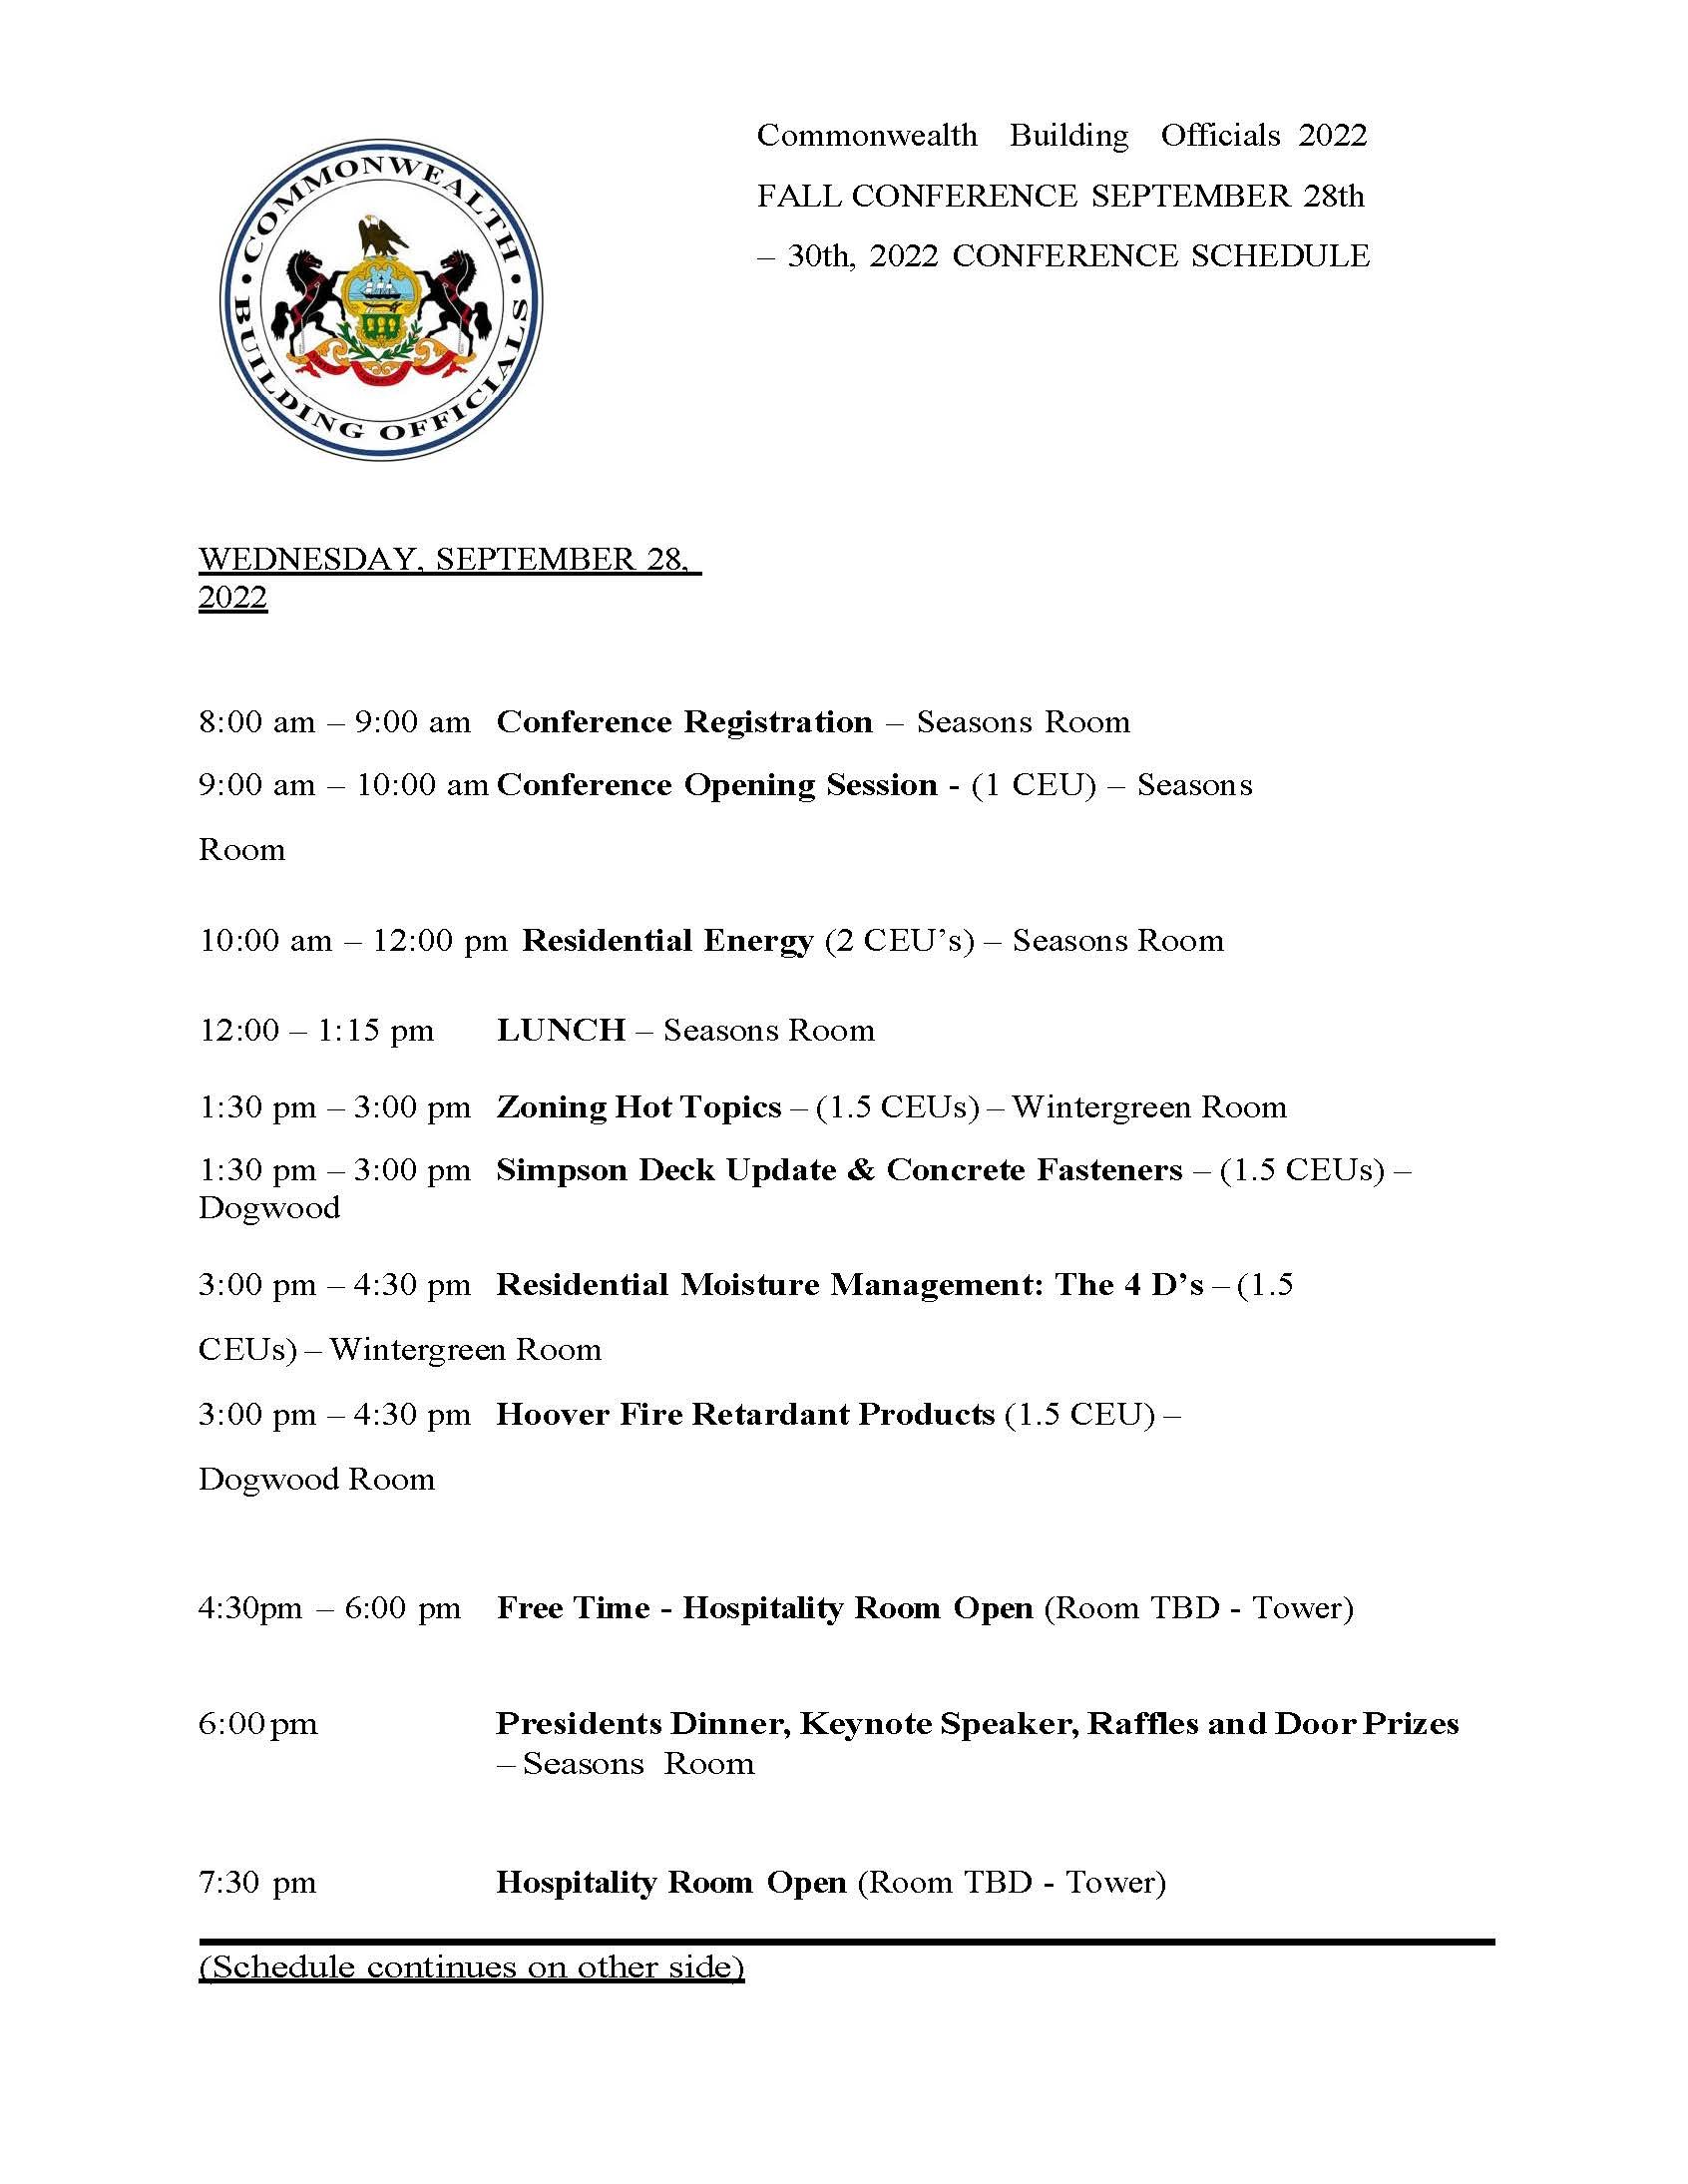 September 2022 CBO Conference Schedule_Page_1.jpg